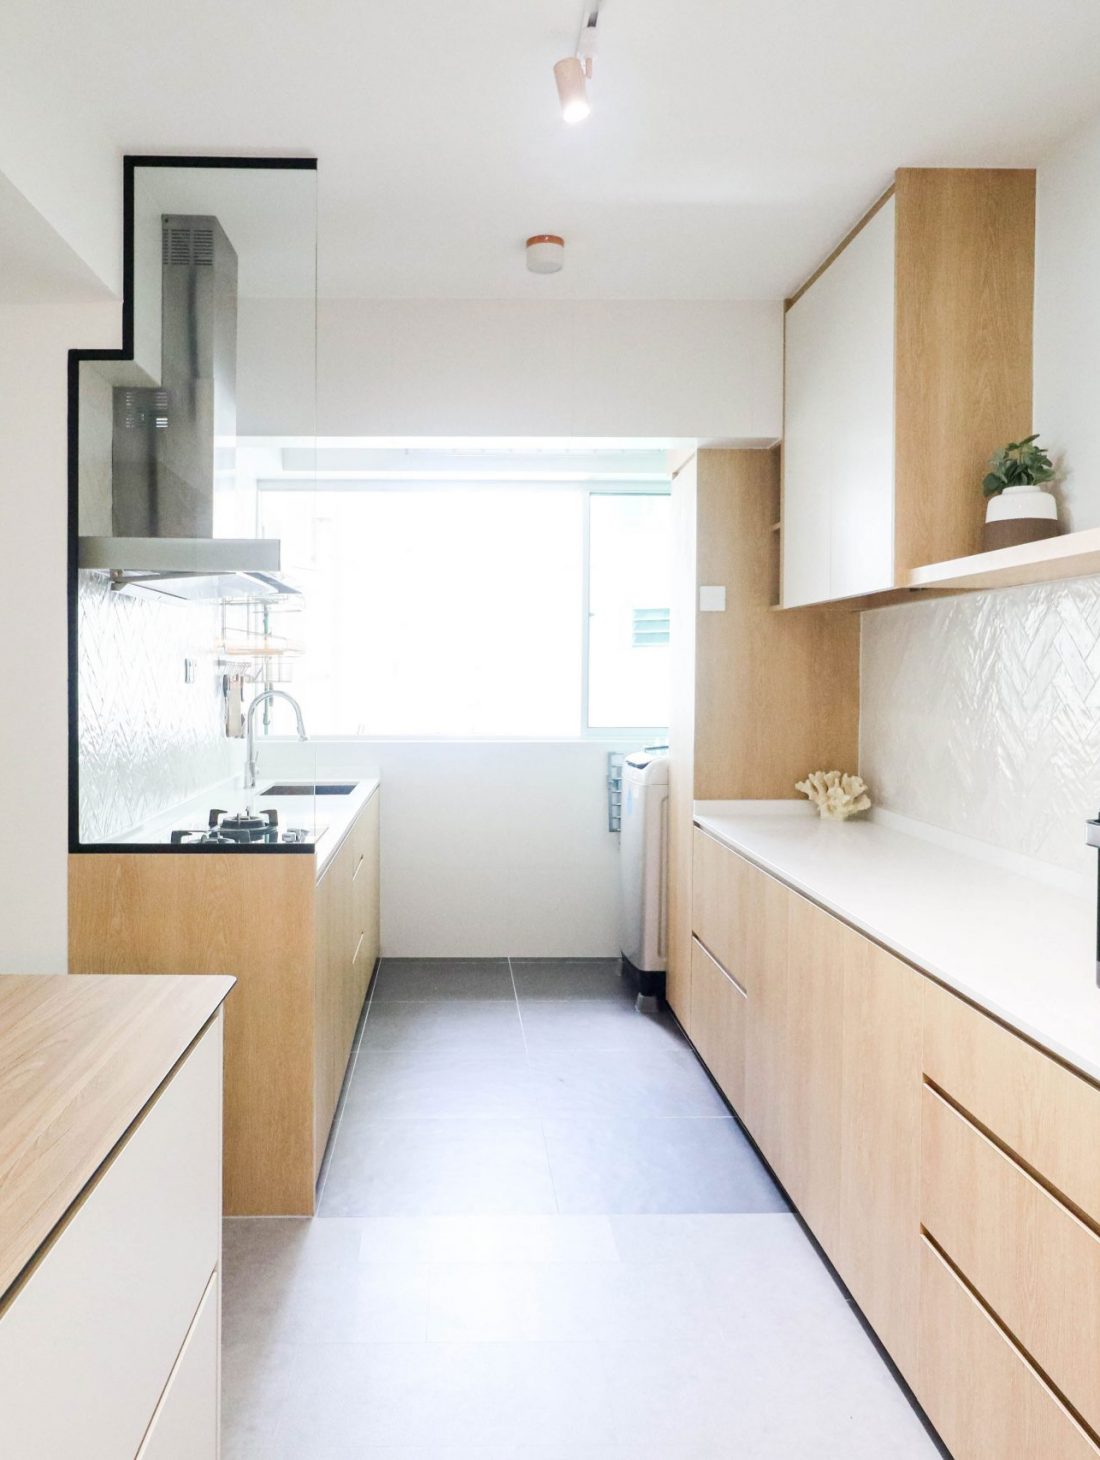 muji style hdb kitchen renovation and interior design hack off service yard wall and kitchen island with cabinets